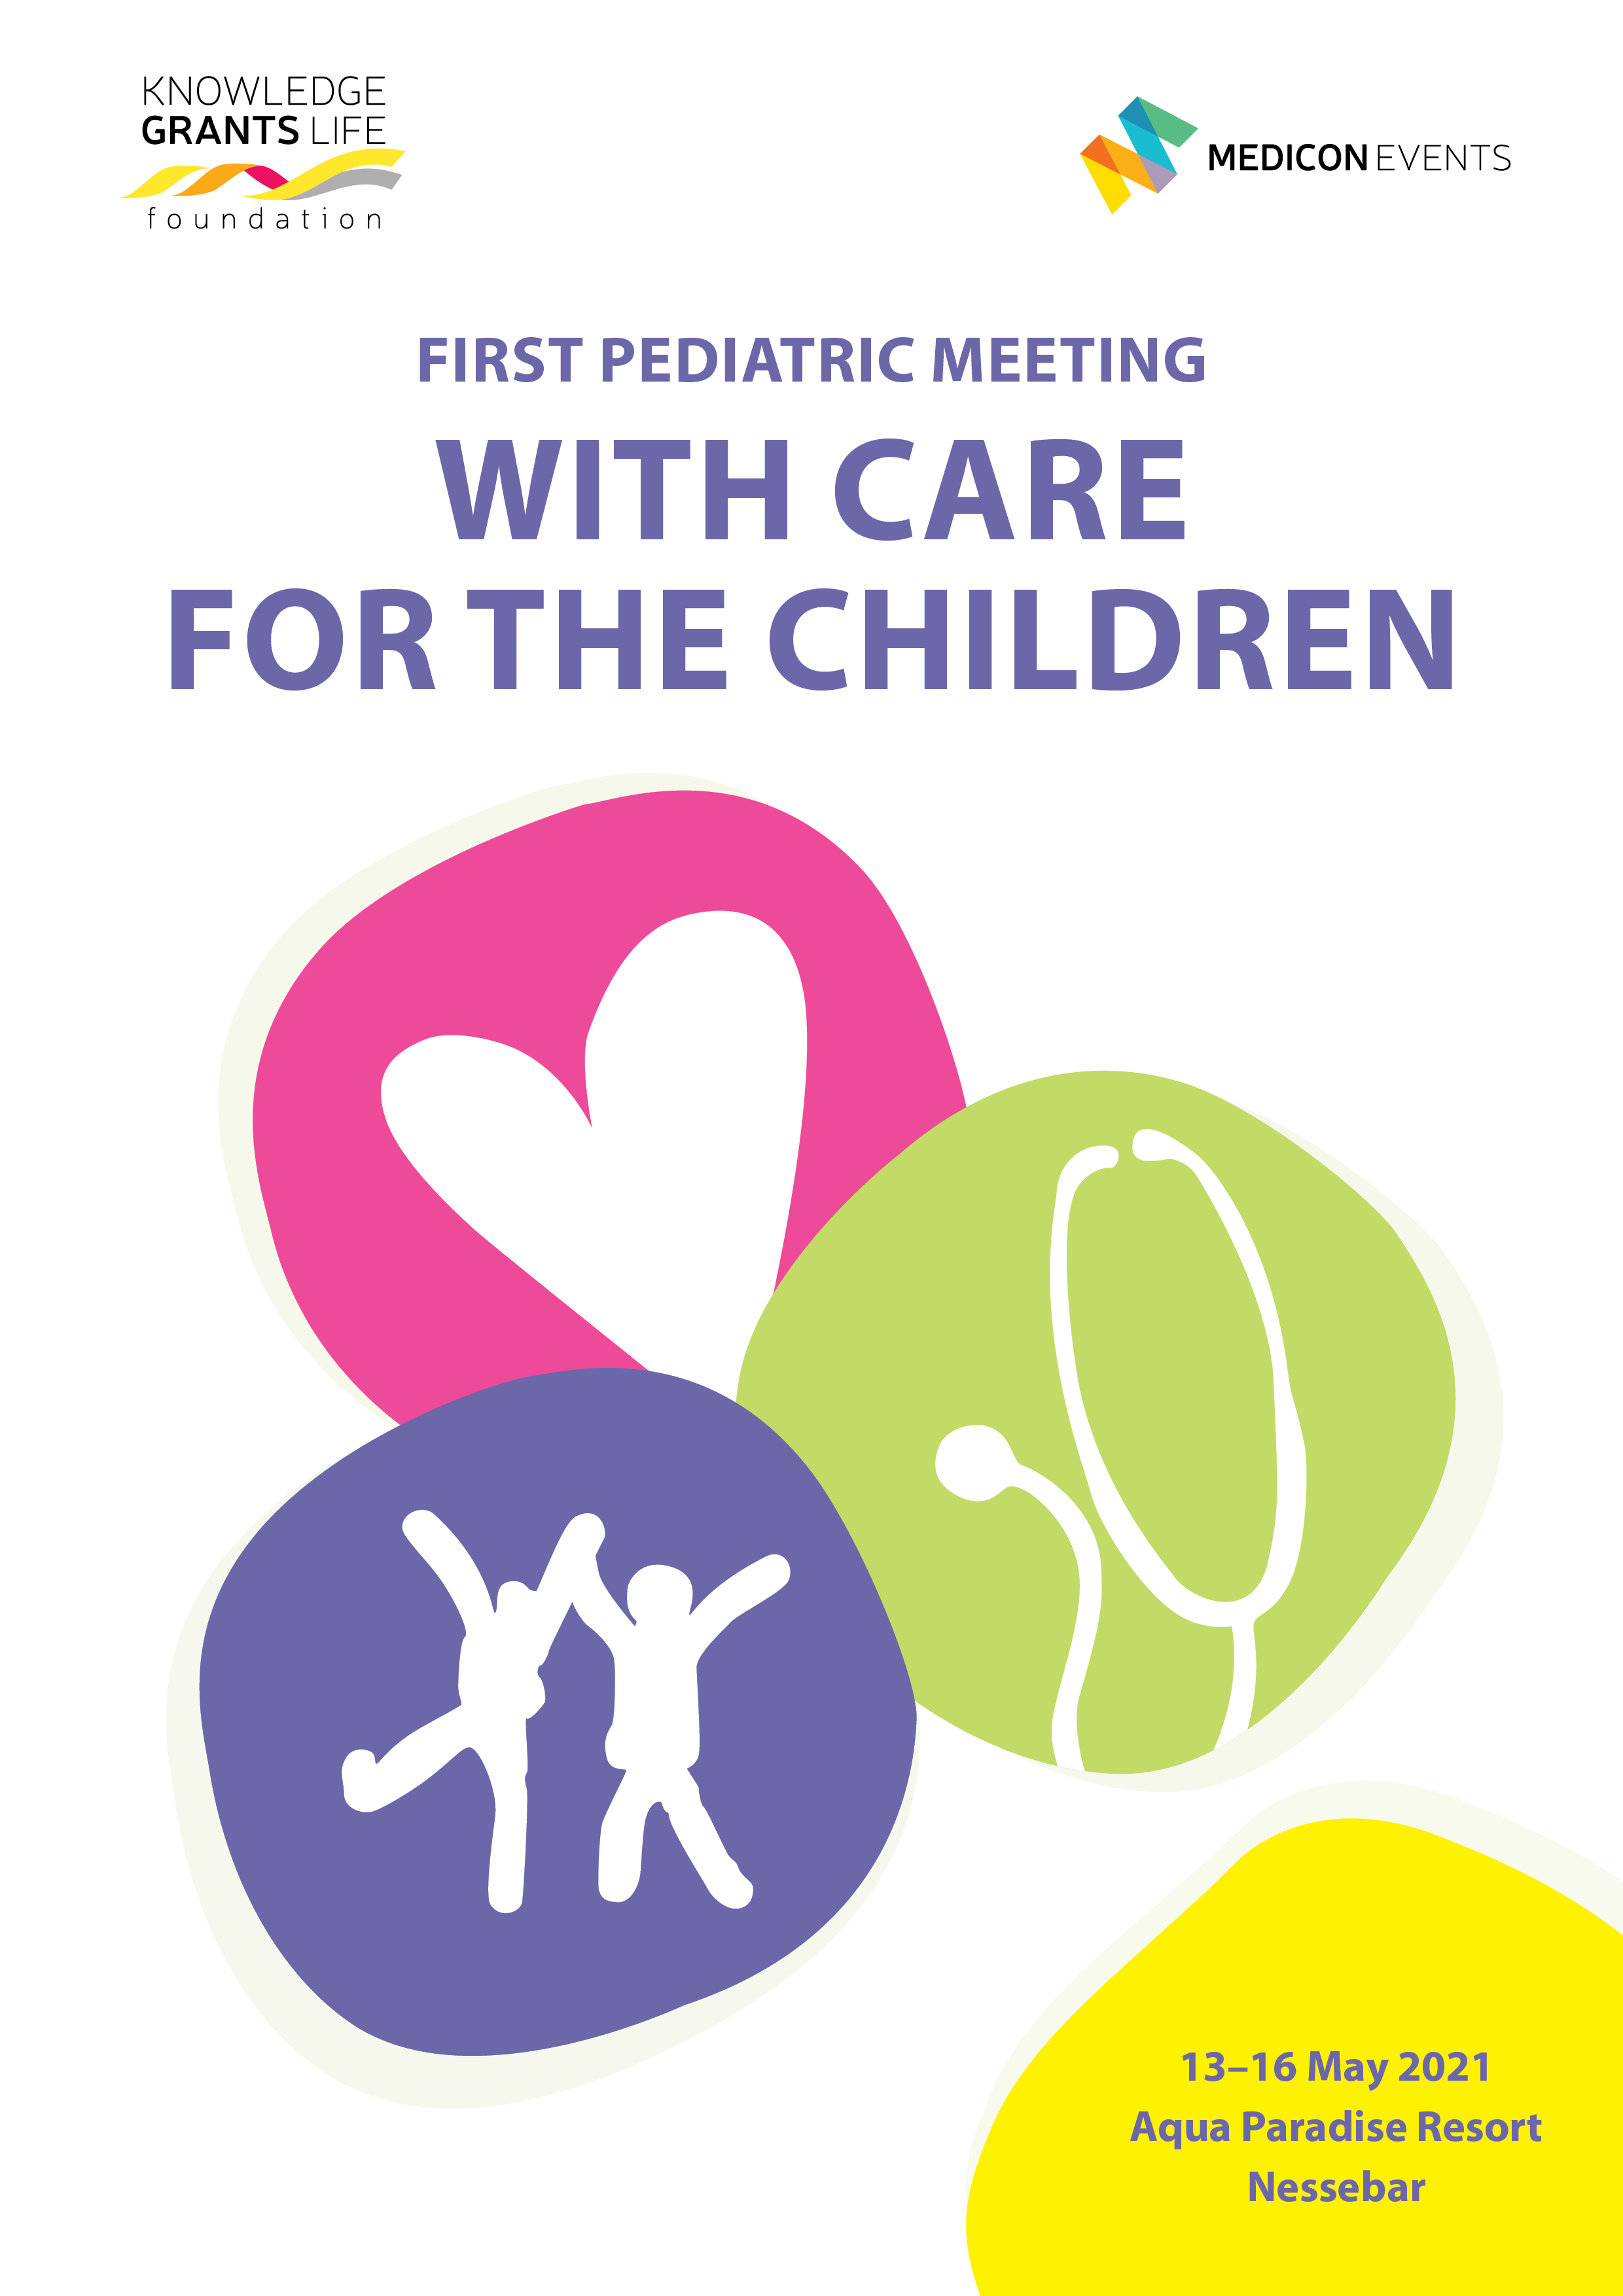 First pediatric meeting "With care for the children"